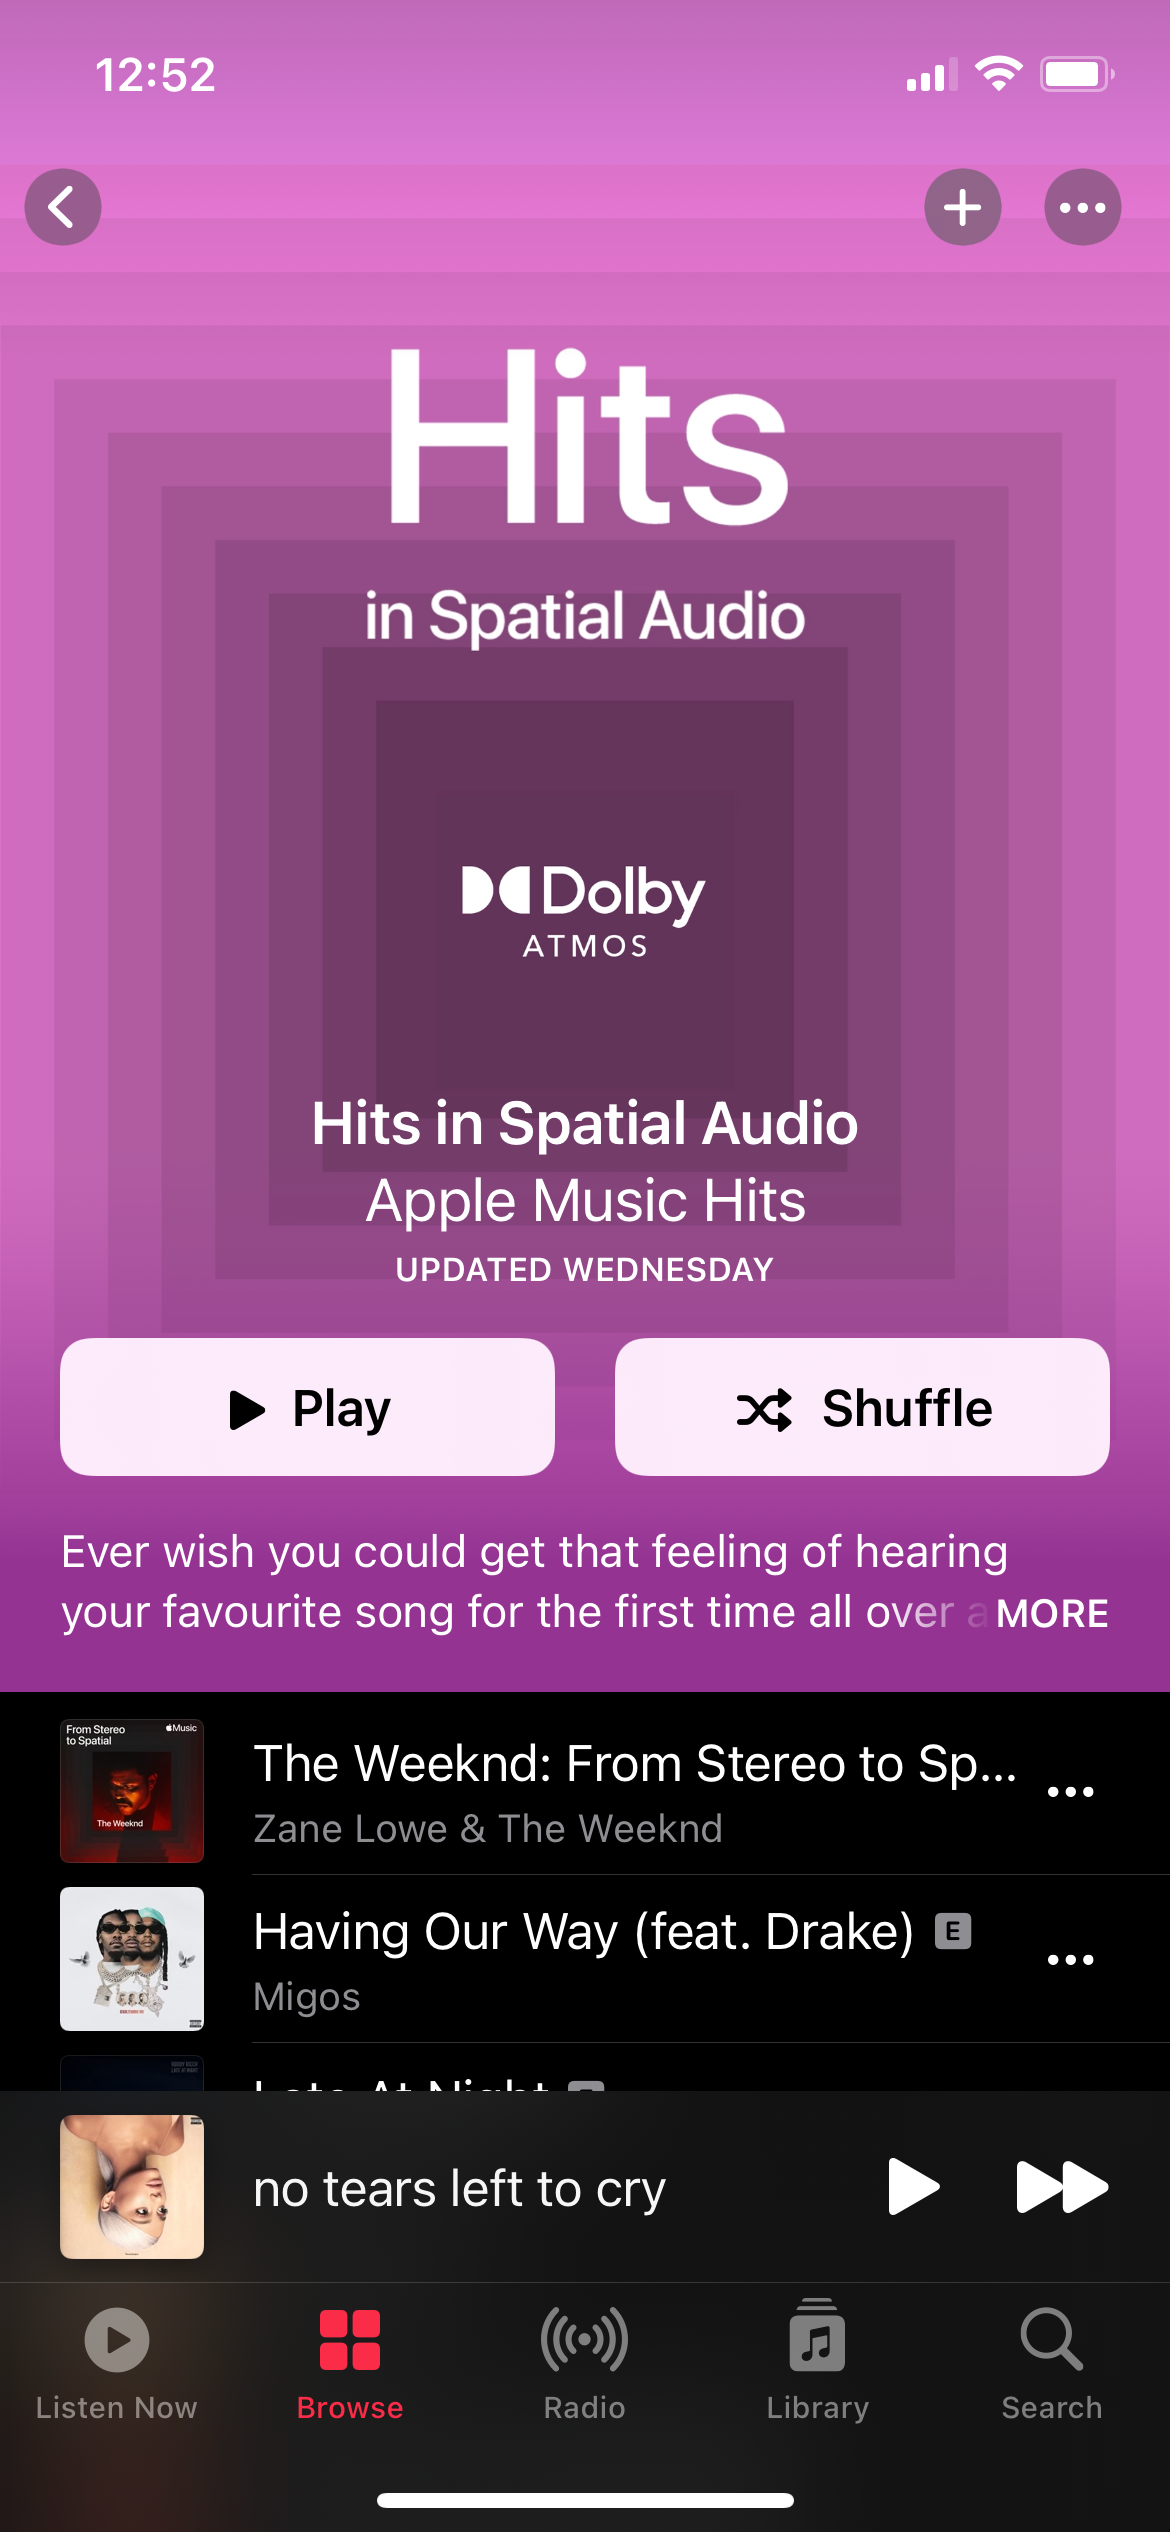 Apple Music-Hits in Spatial Audio